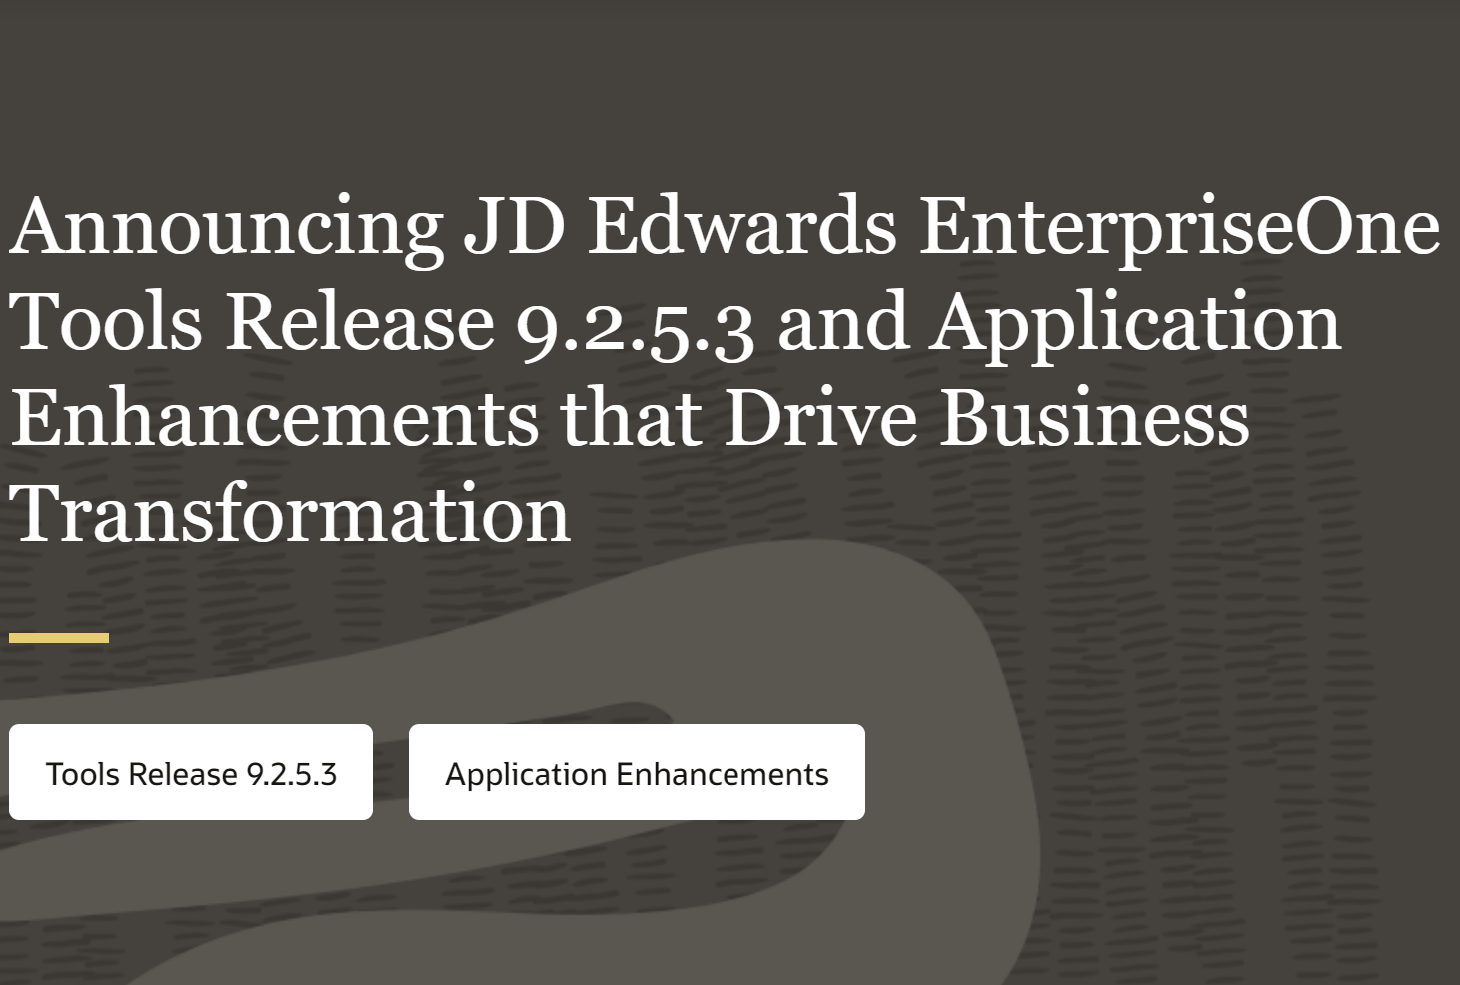 JD Edwards Announce Release 9.2.5.3